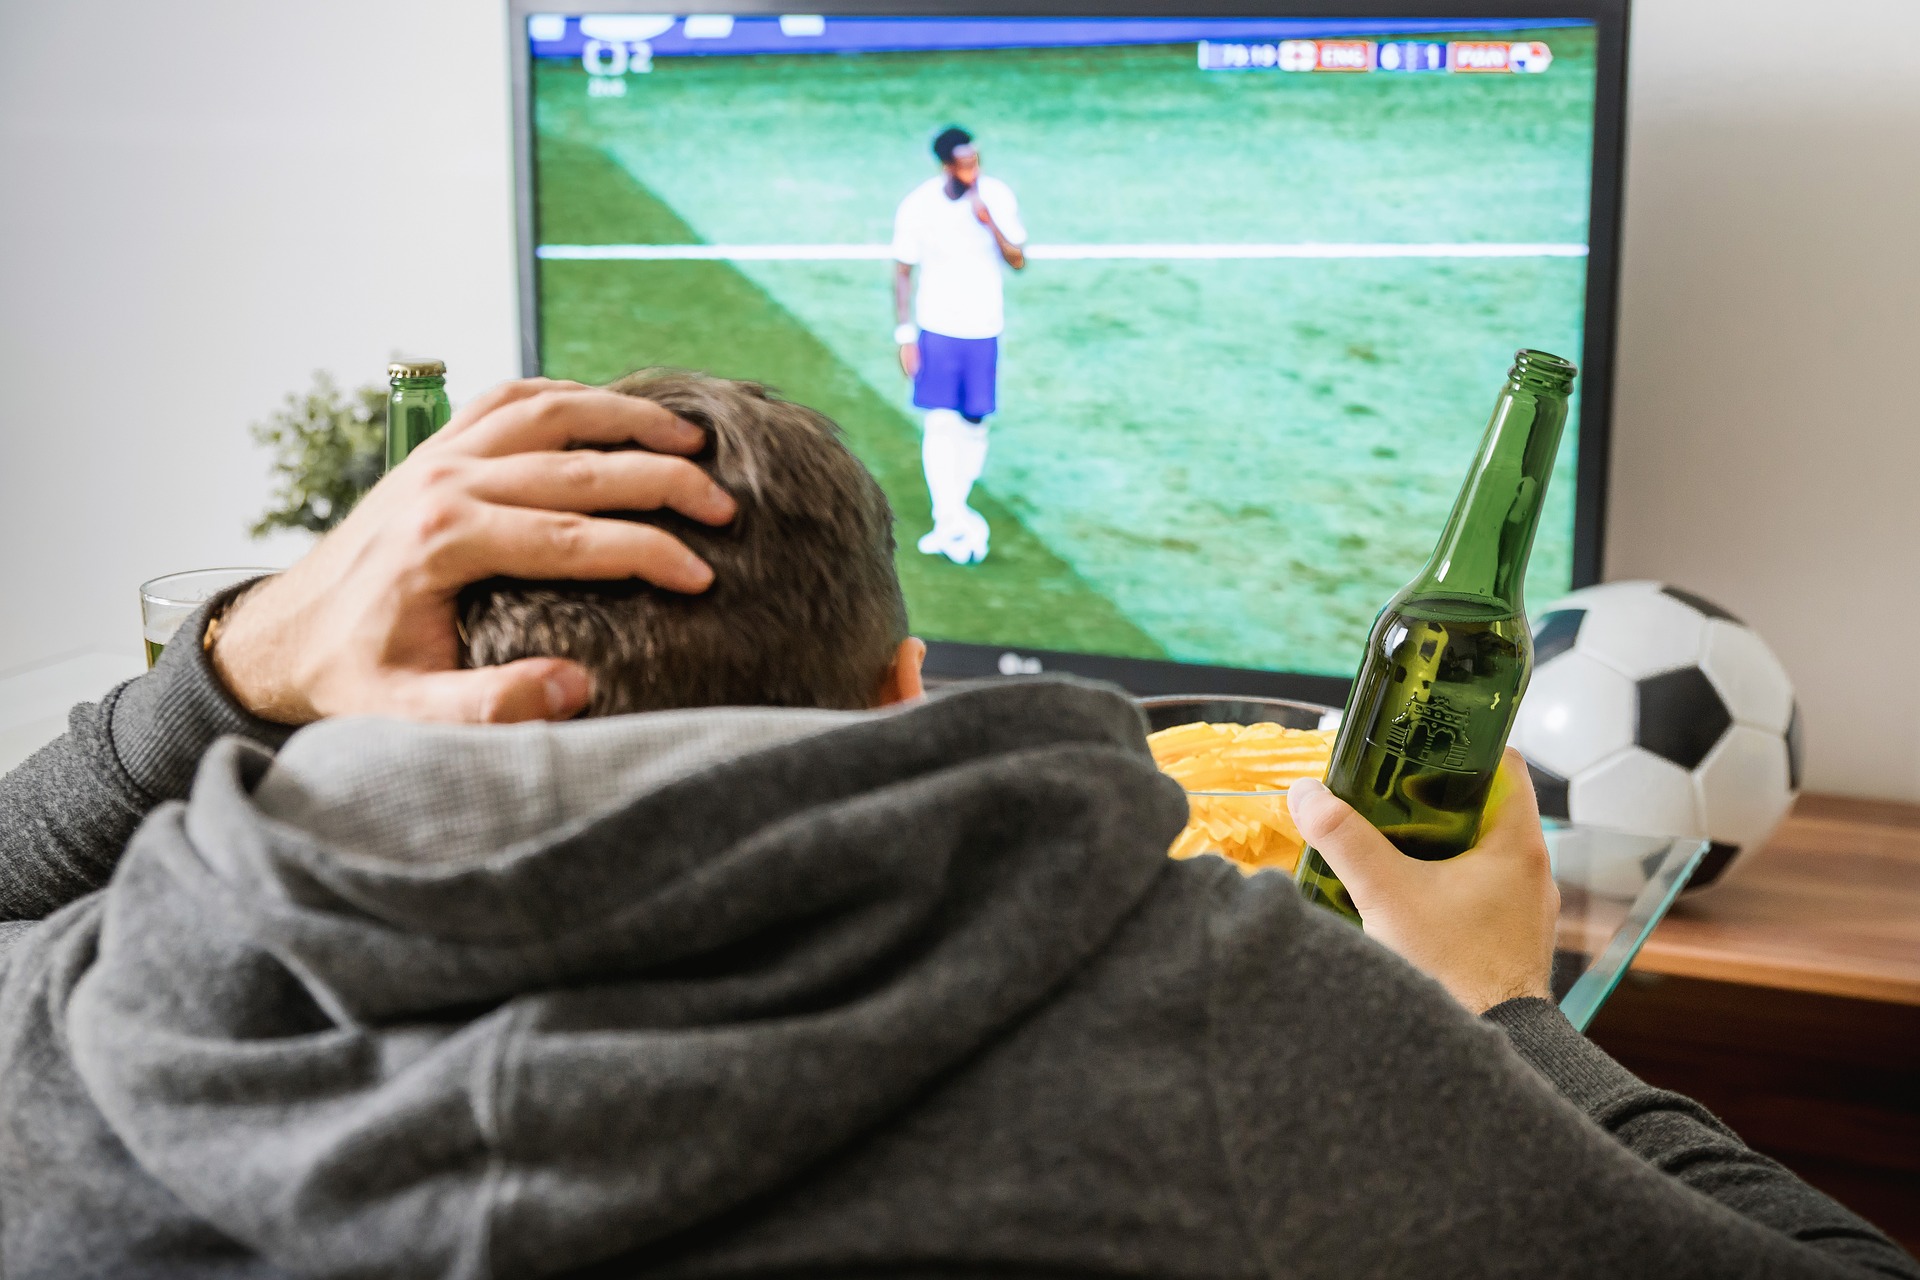 Sports Streaming Has Room for Improvement in 2019